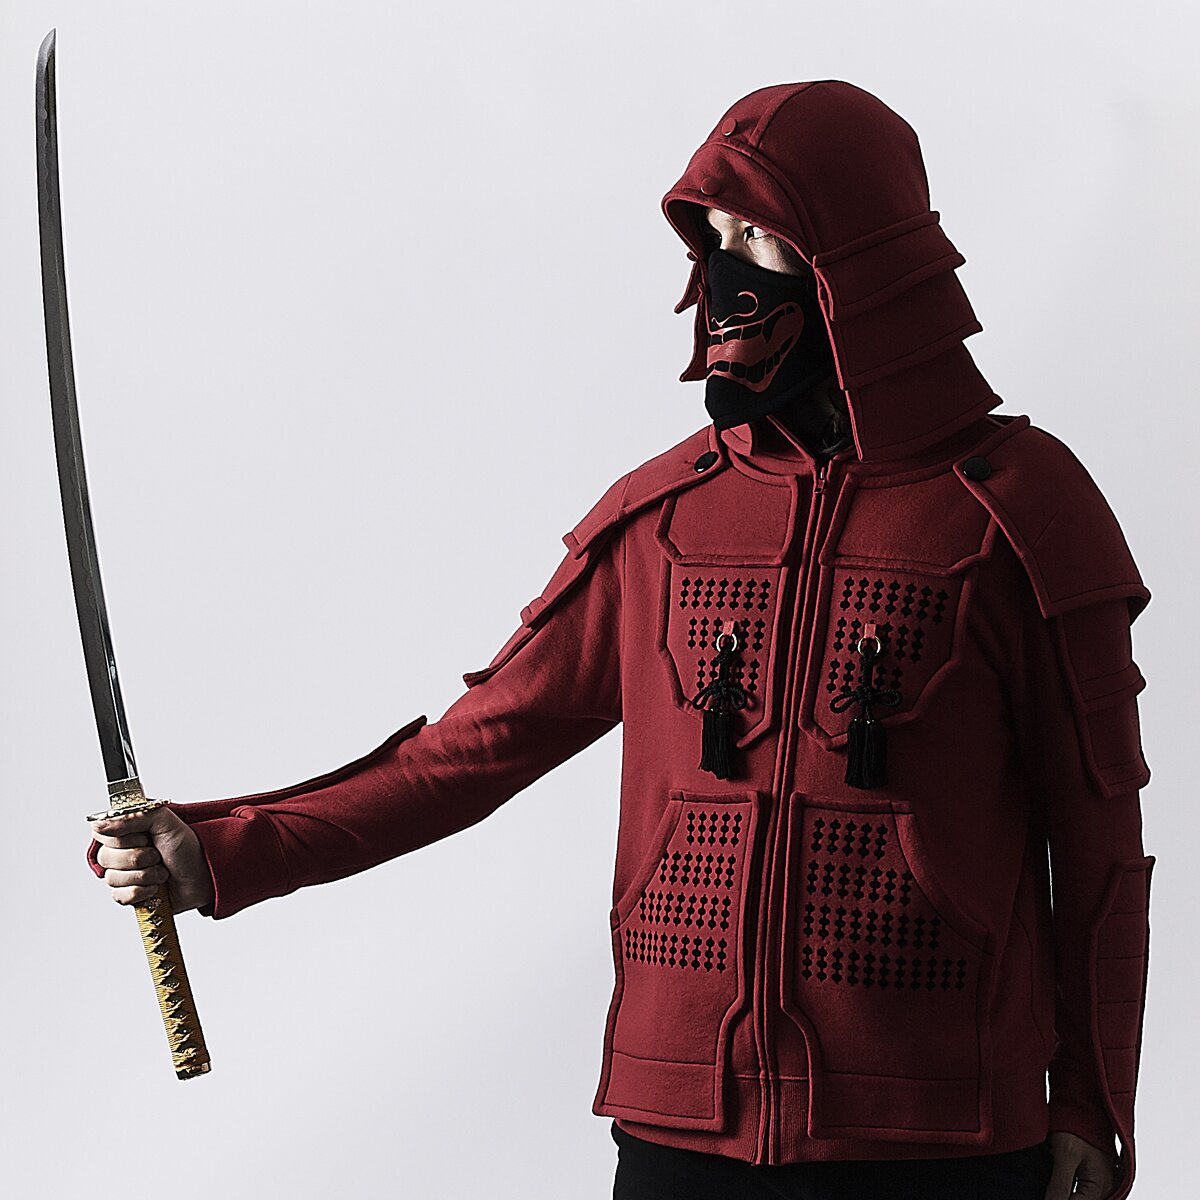 Awesome Samurai Armor Hoodies are looking to conquer the whole